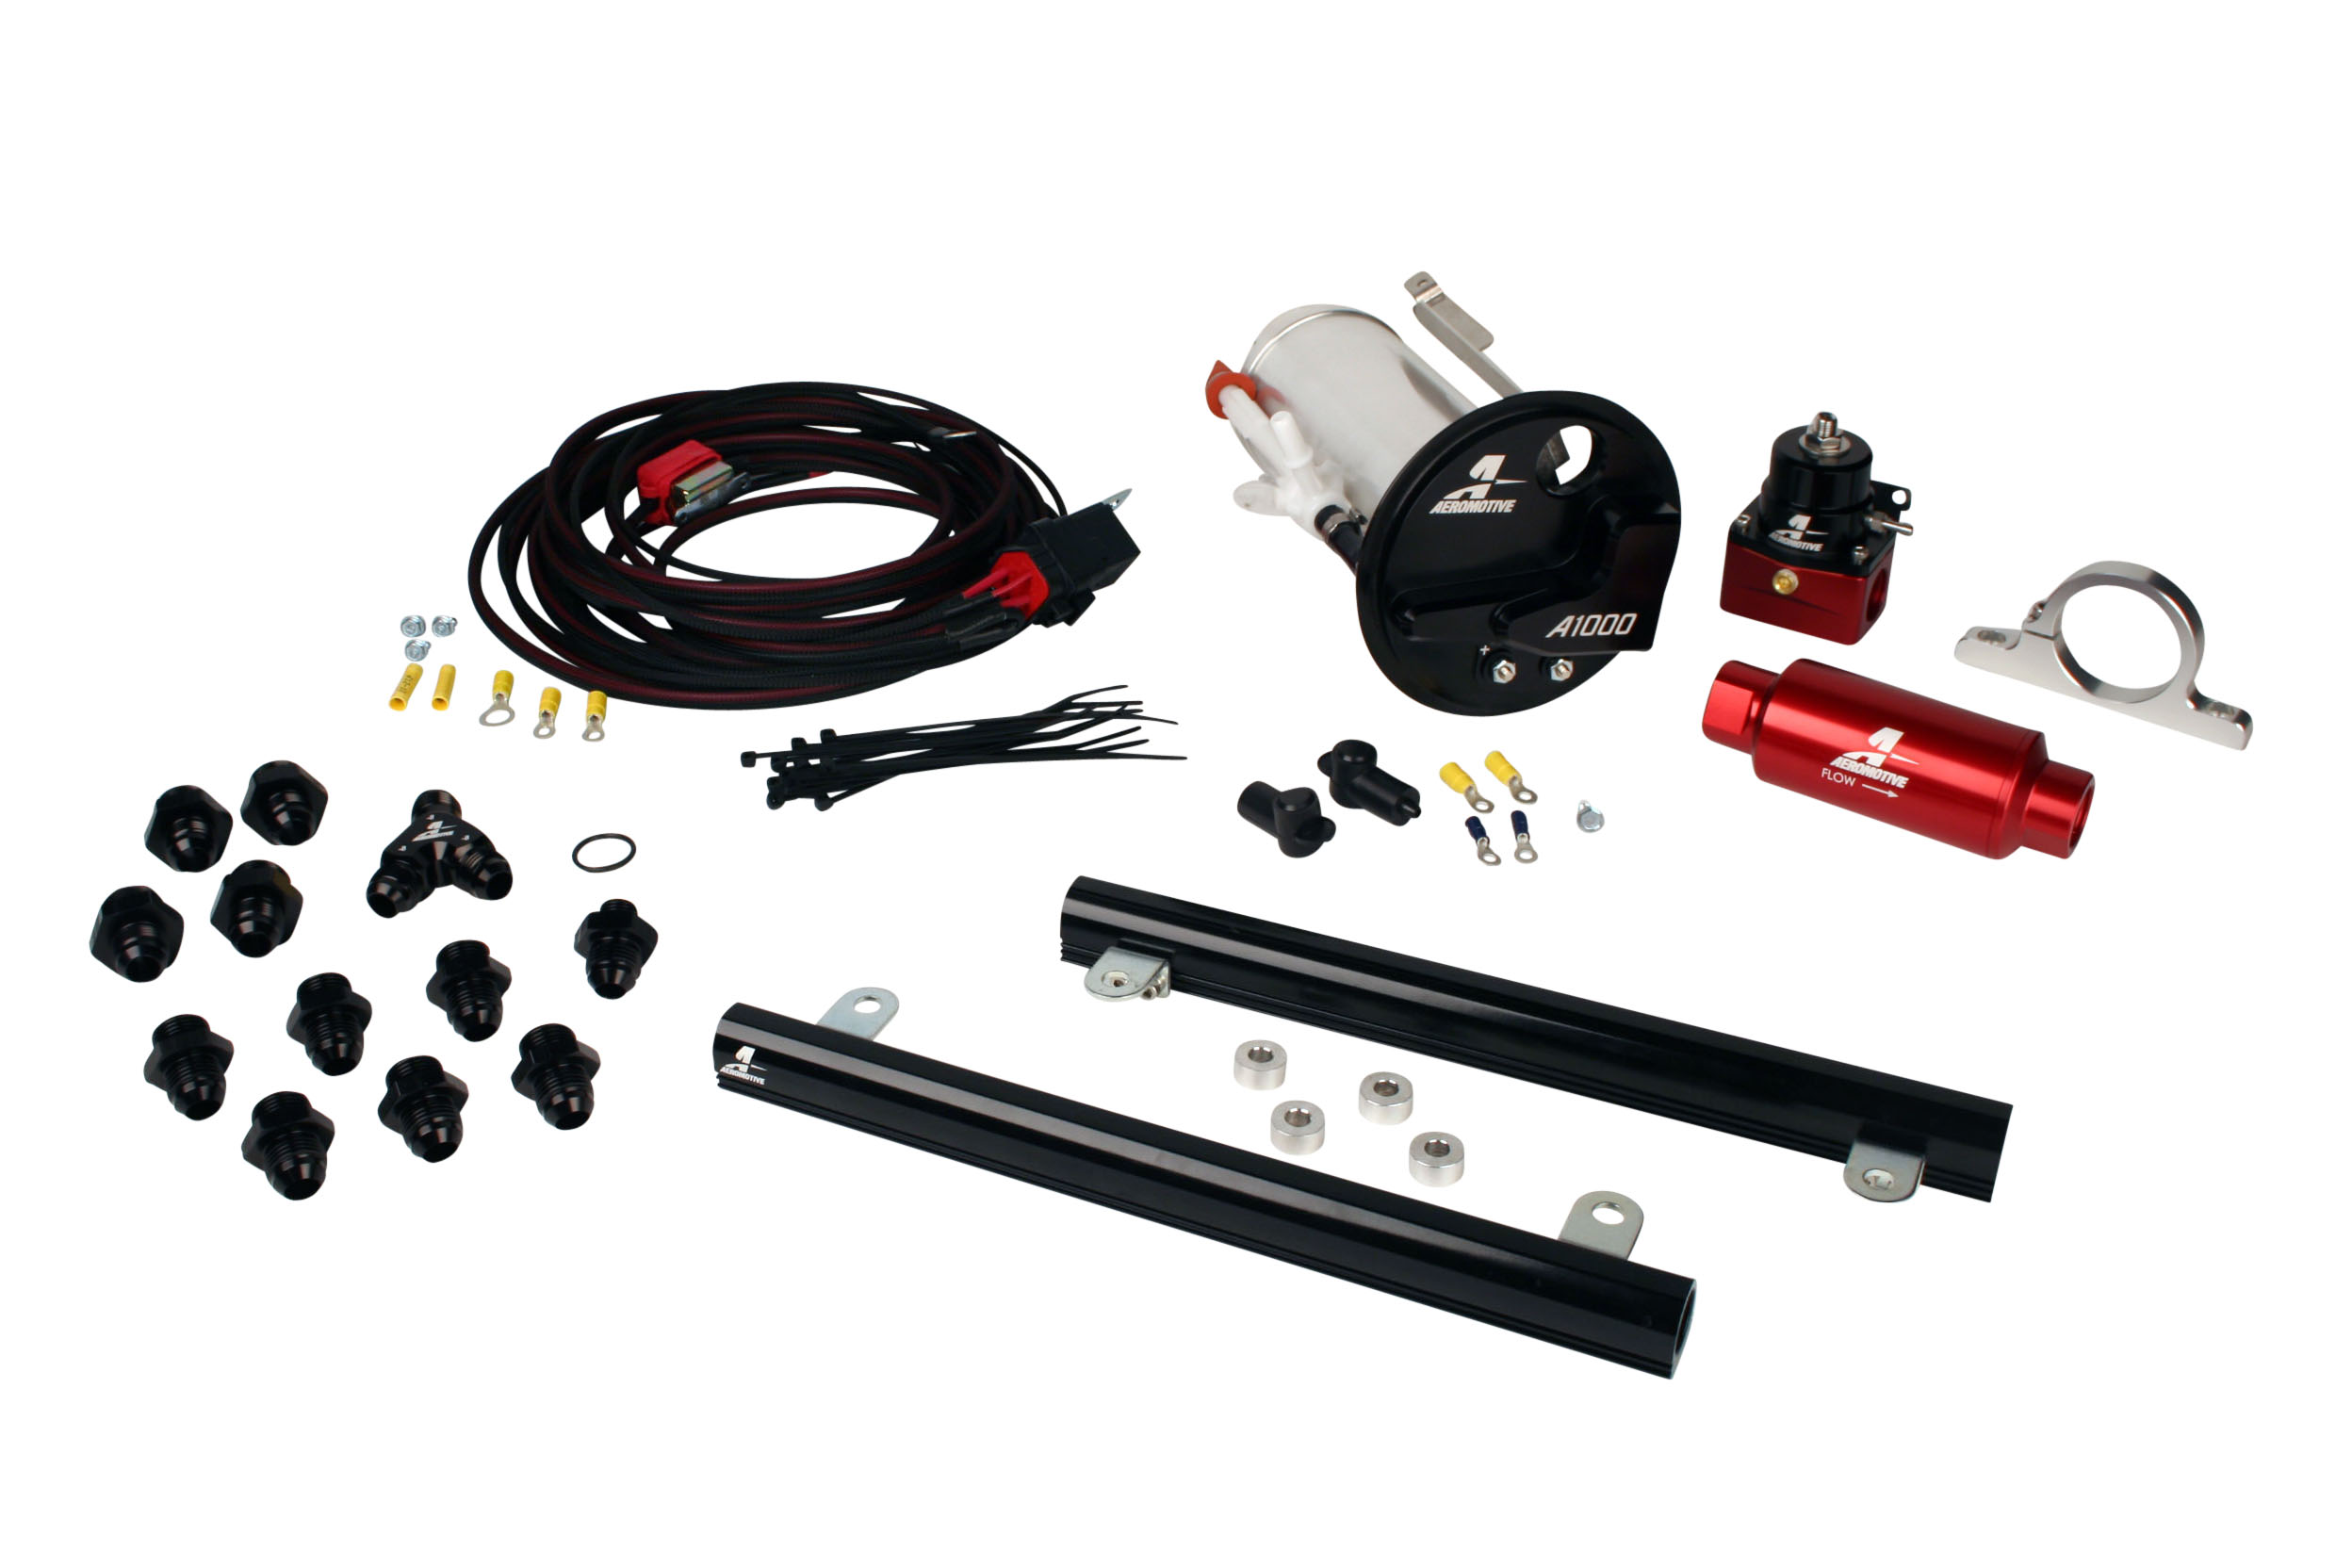 2007-2012 Ford Mustang Shelby GT500 Aeromotive Stealth A1000 Race Fuel System w/5.4L CJ Fuel Rails